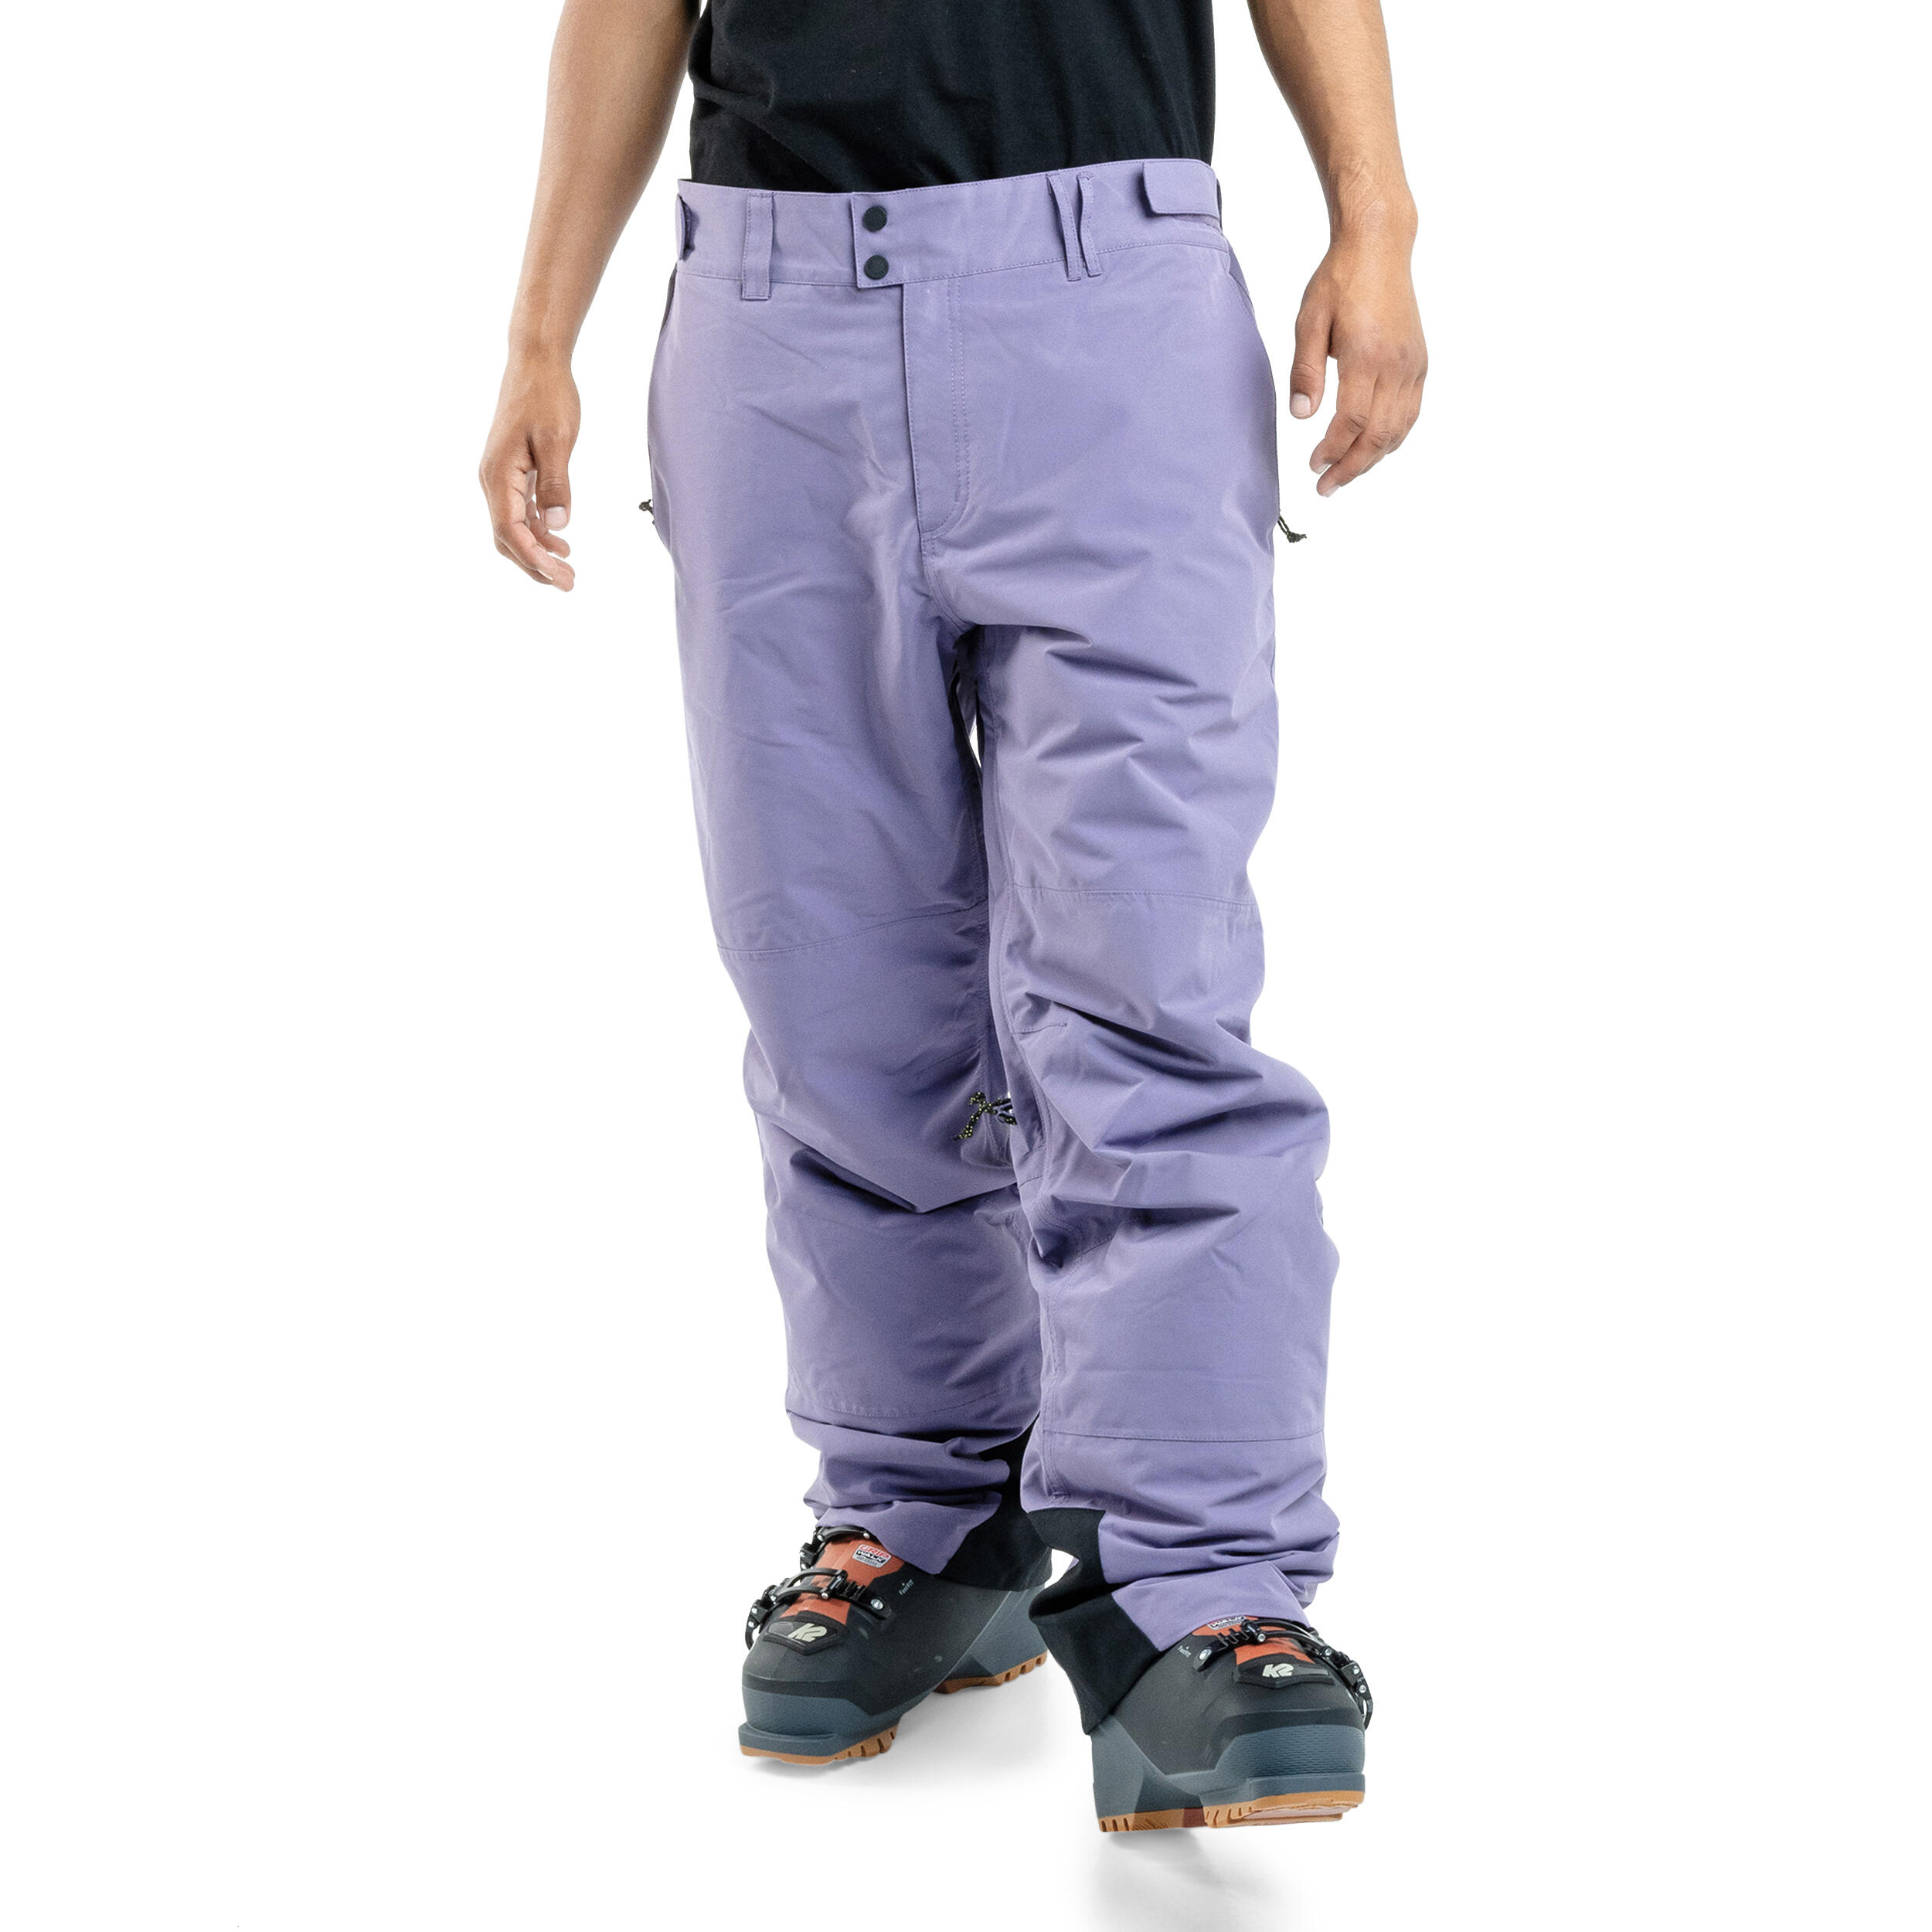 PLANKS Planks Easy Rider Men's Ski Pants in Steep Purple with Pockets - Sports Trousers